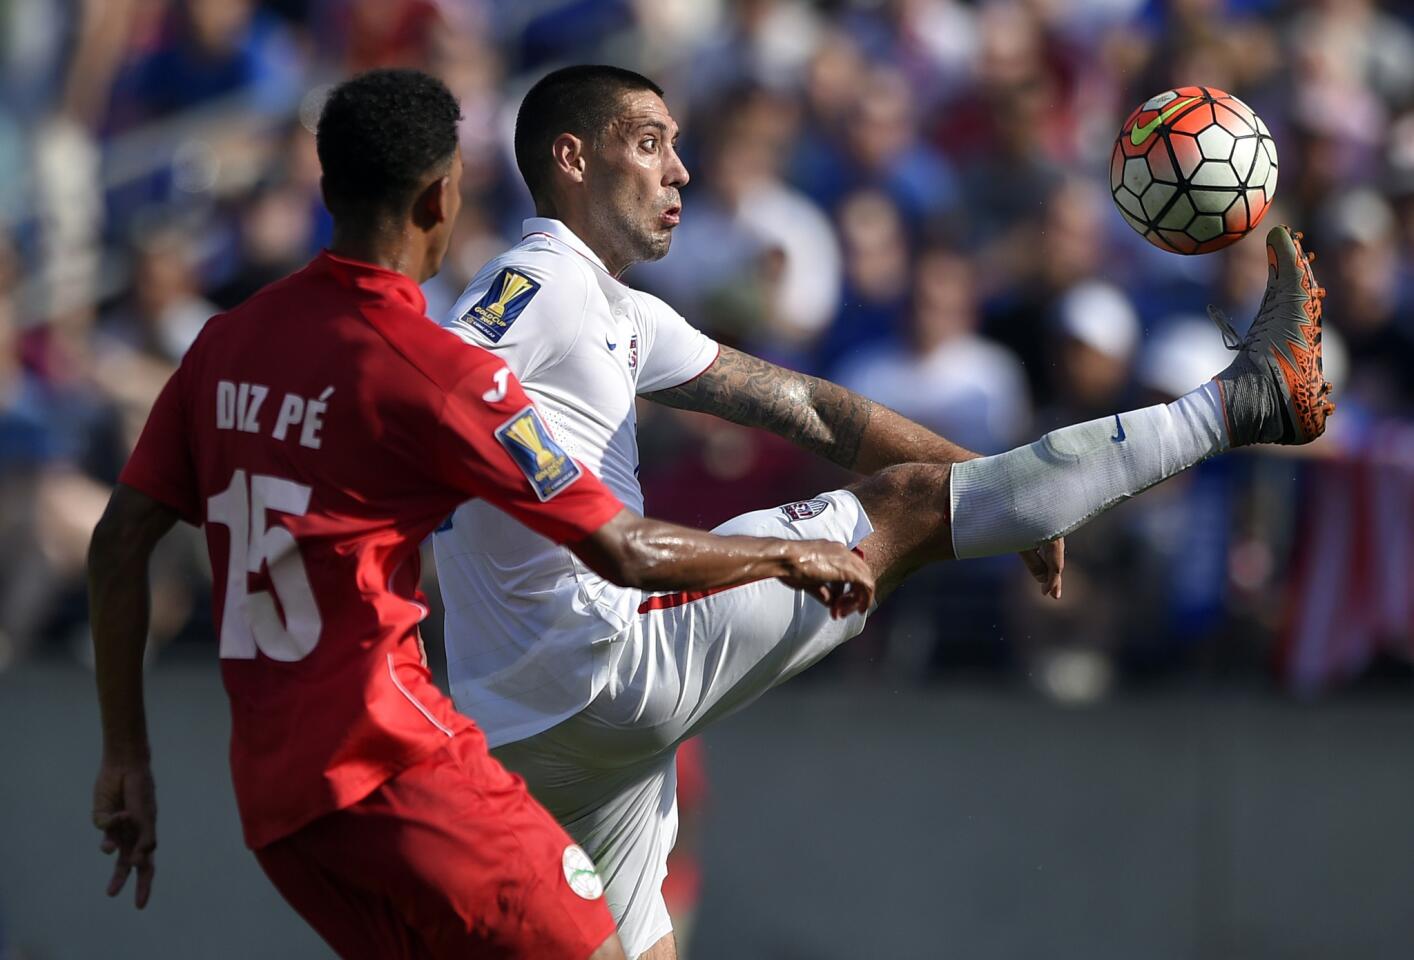 United States forward Clint Dempsey, right, kicks the ball against Cuba's Adrian Diz Pe (15) during the first half of a CONCACAF Gold Cup soccer quarterfinal match, Saturday, July 18, 2015, in Baltimore.